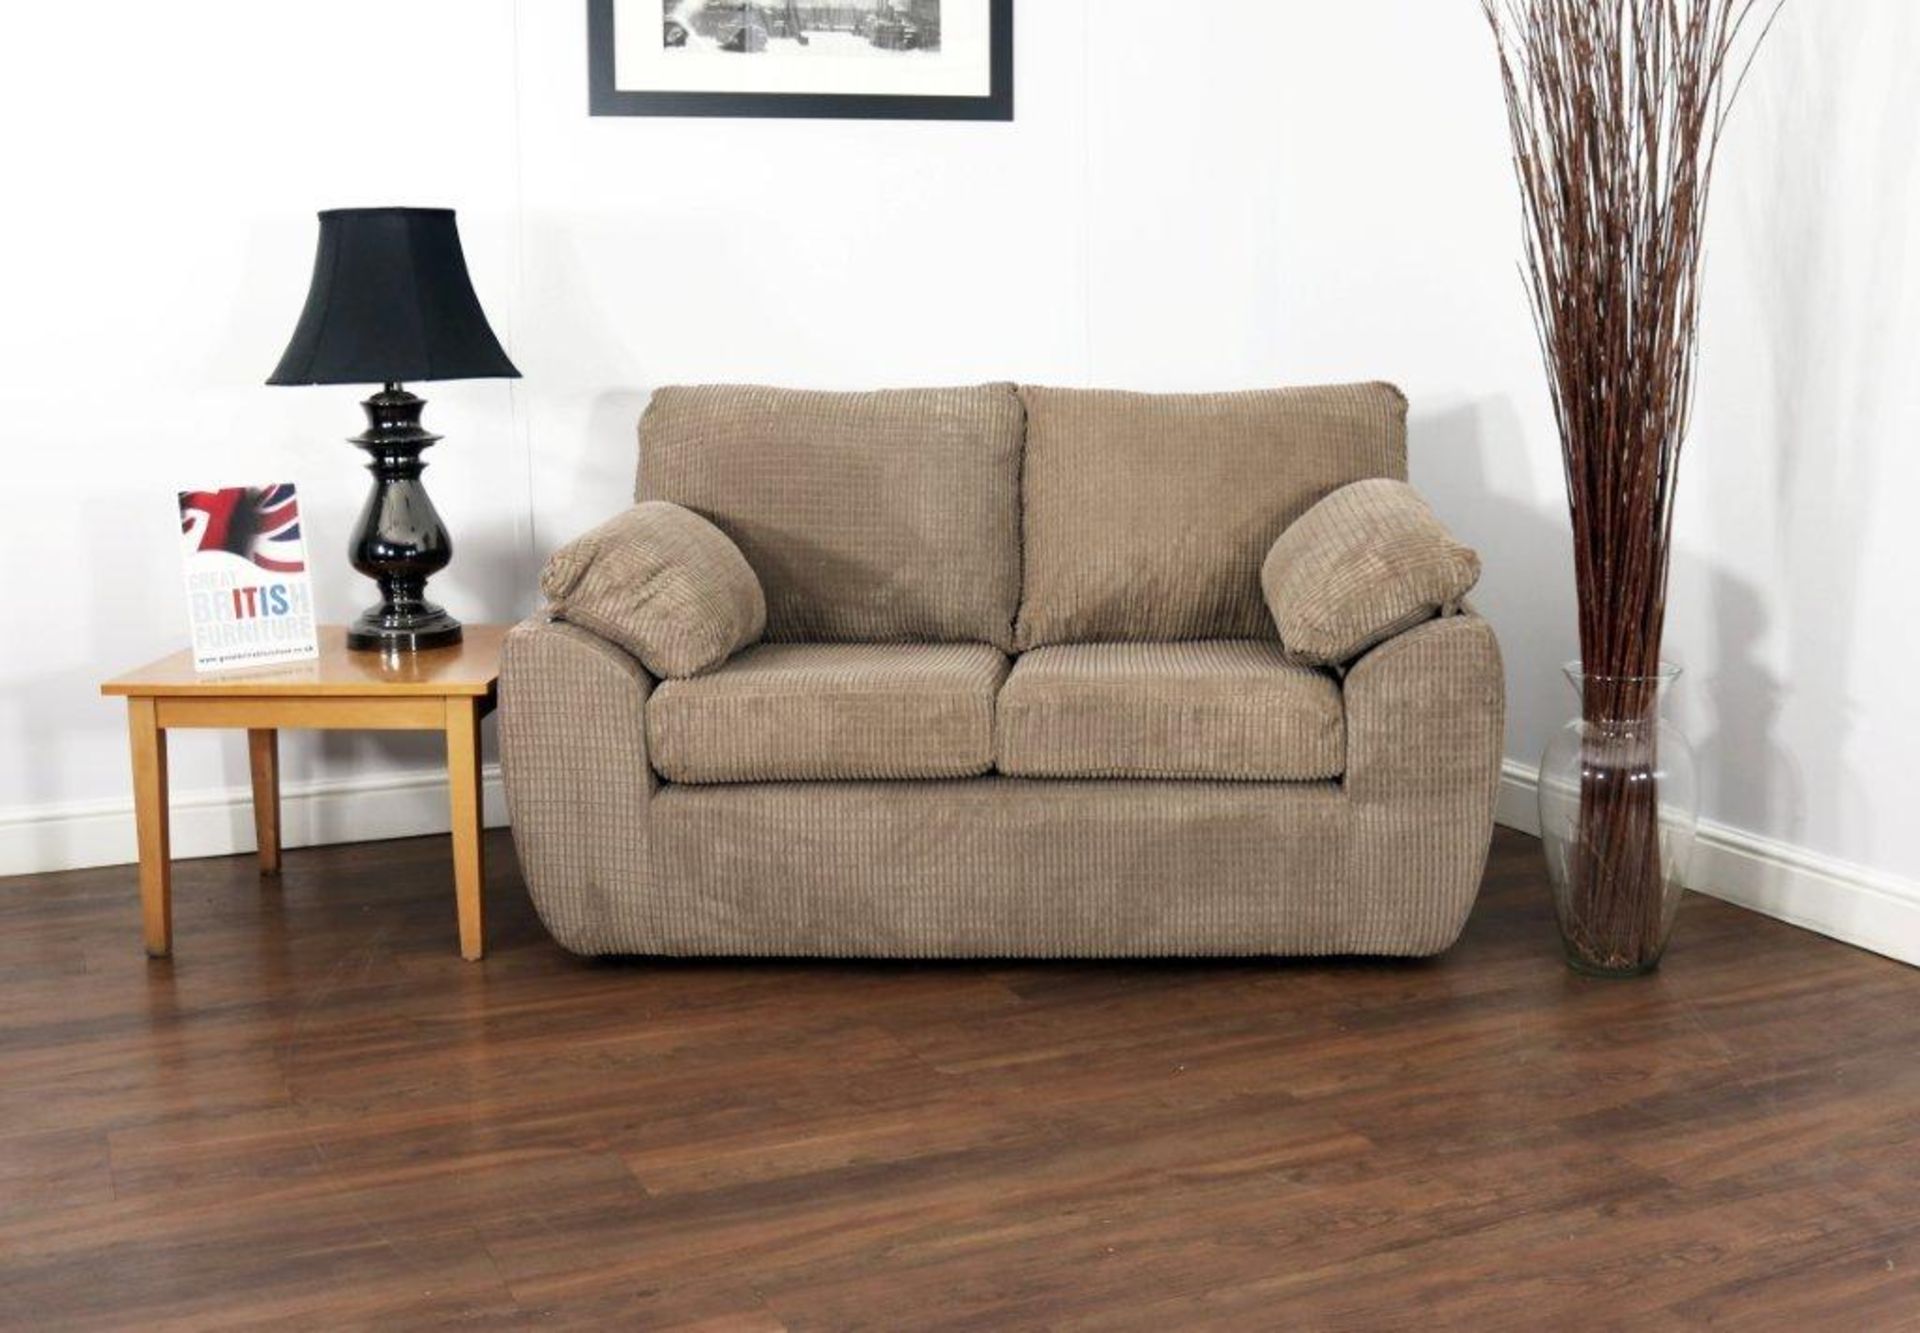 Brand new direct from the manufacturers 3 seater and 2 seater, the Jarvis is a soft woven fabric